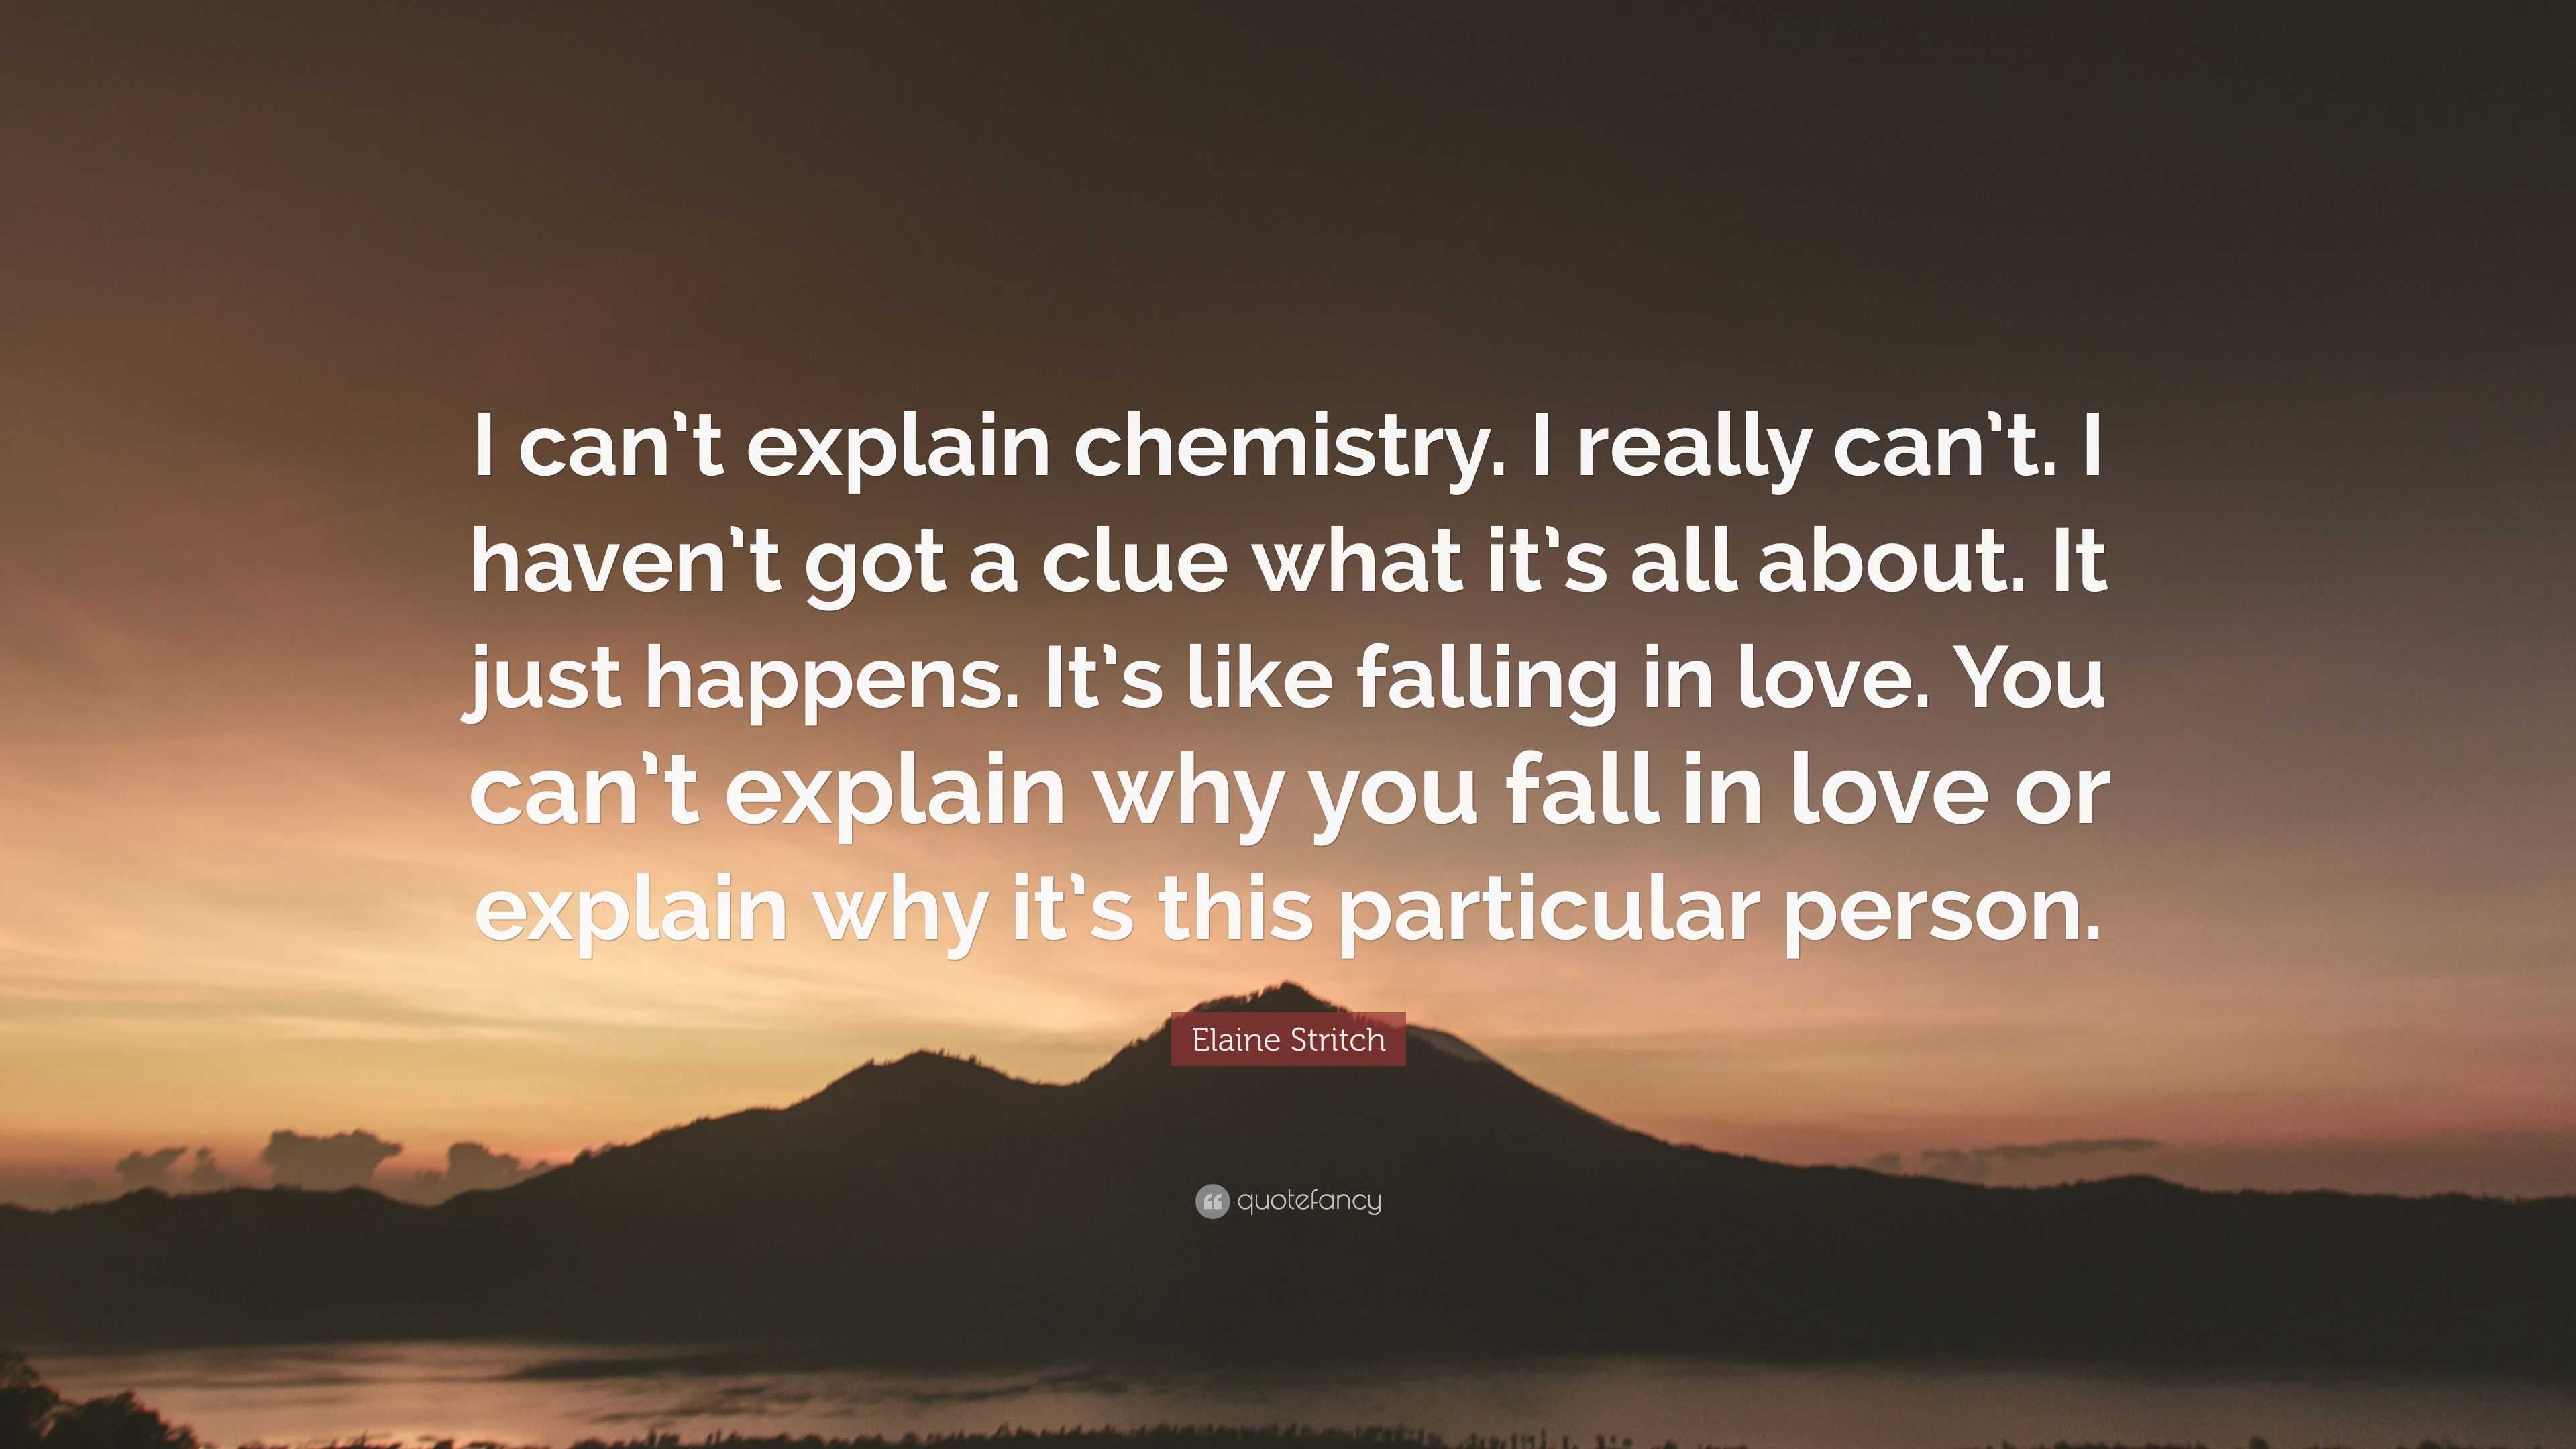 Elaine Stritch Quote I Can T Explain Chemistry I Really Can T I Haven T Got A Clue What It S All About It Just Happens It S Like Falling